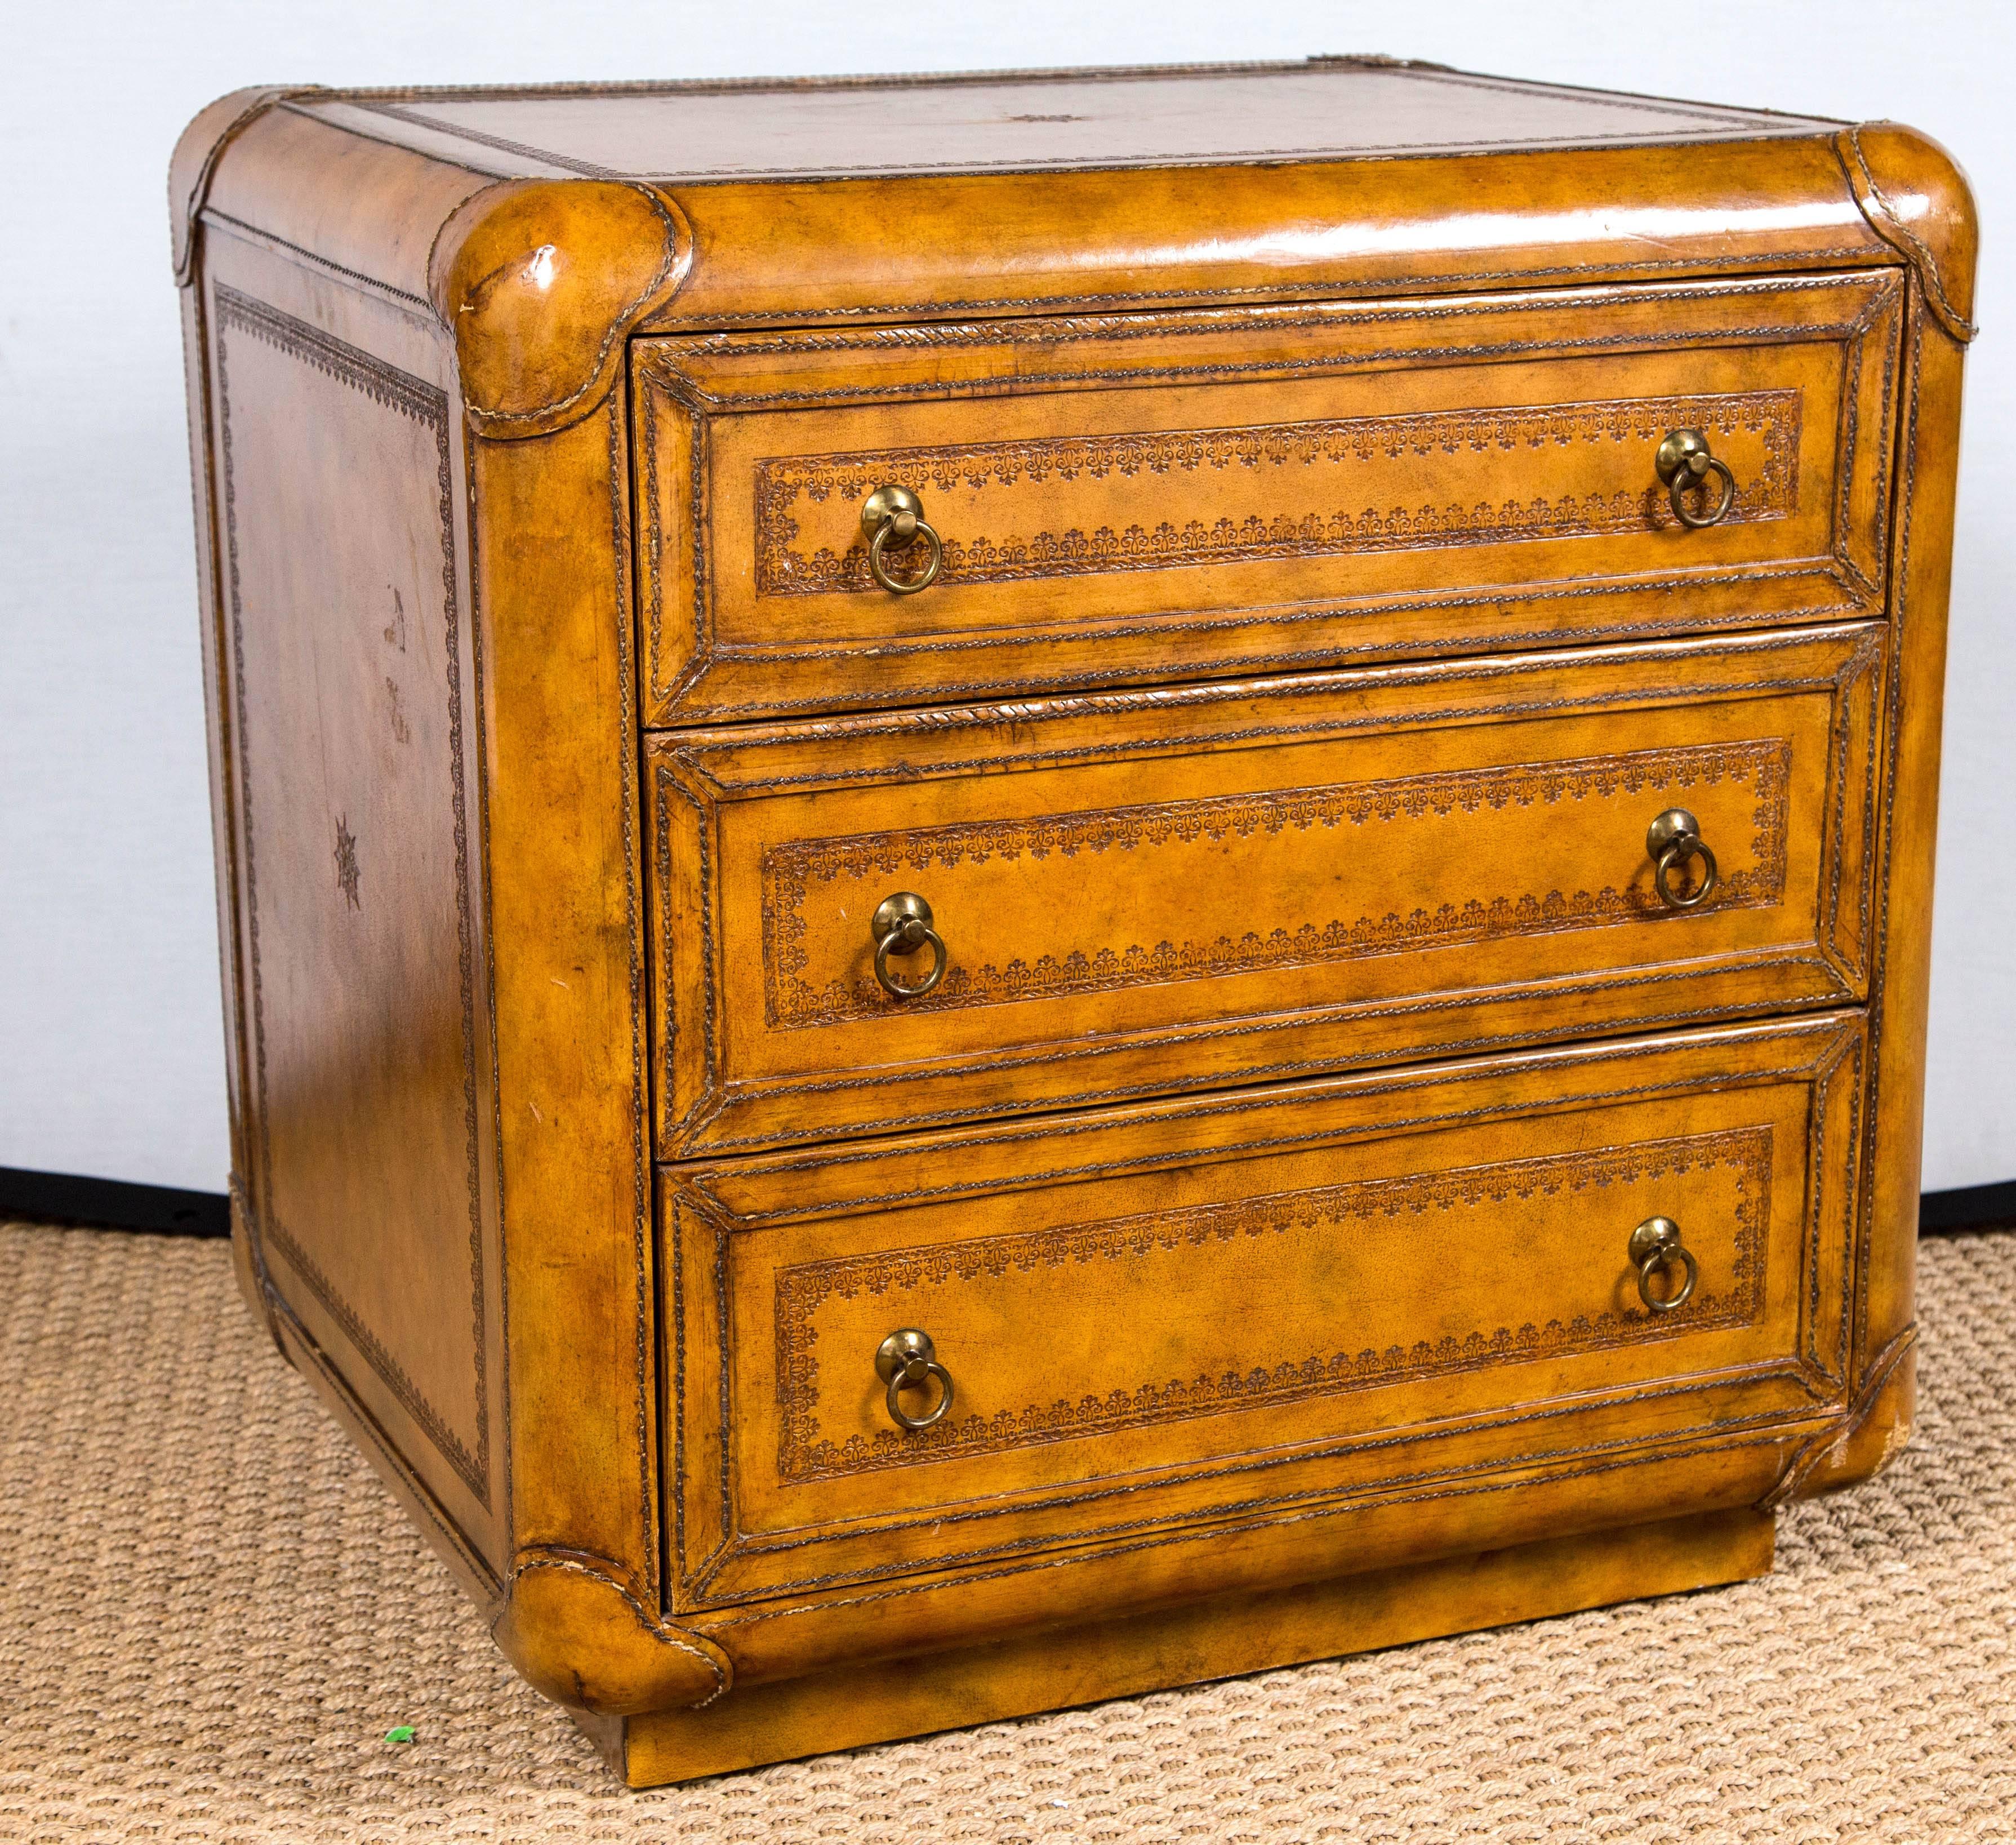 A Maitland-Smith hand tooled leather chest of drawers with three drawers. Classic with clean lines.